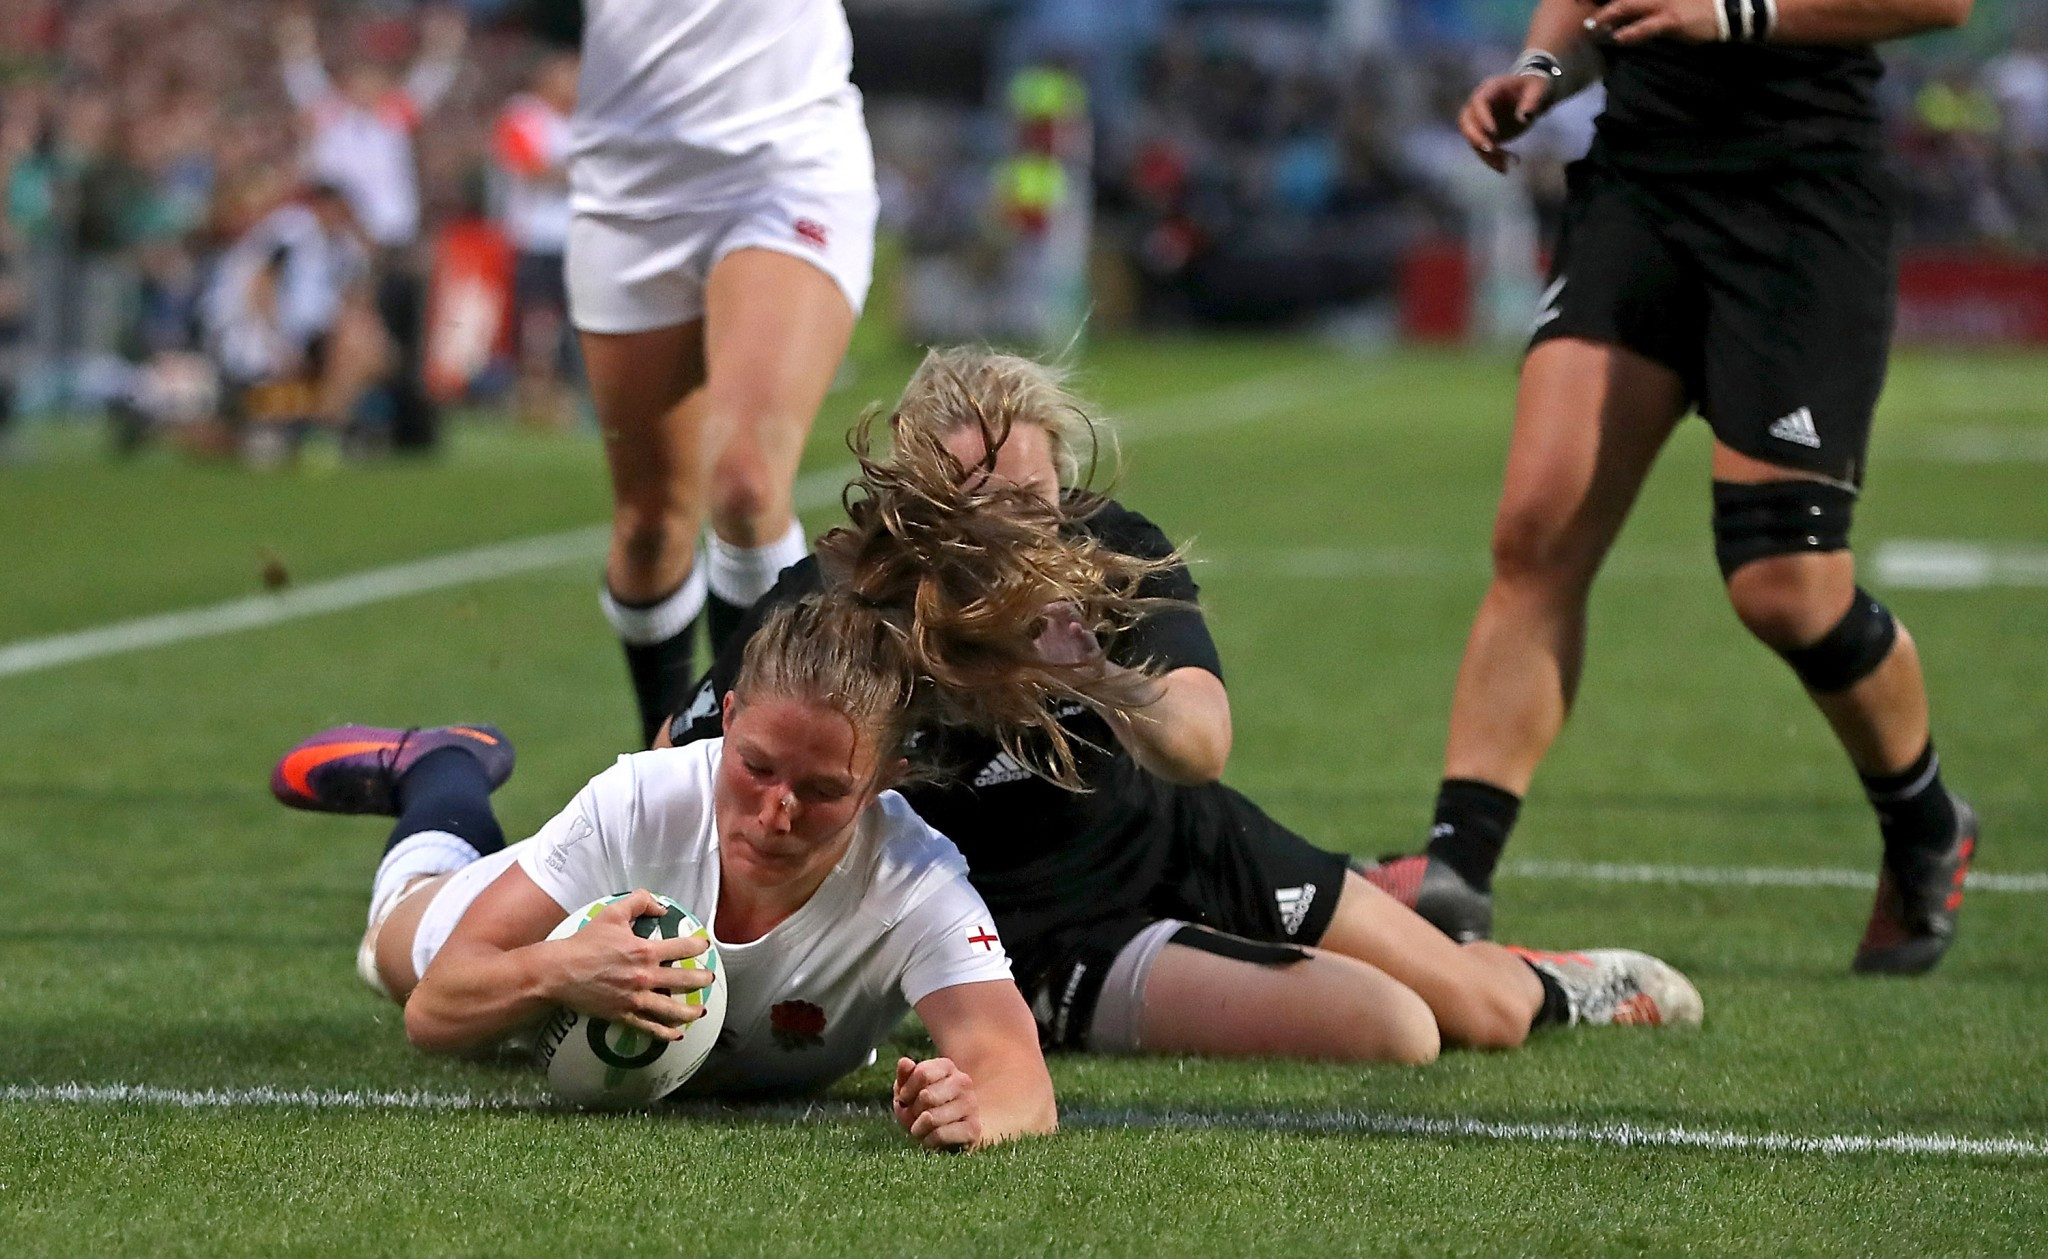 England Rugby state 30,000 women and girls are now participating in the sport in the country ©Getty Images